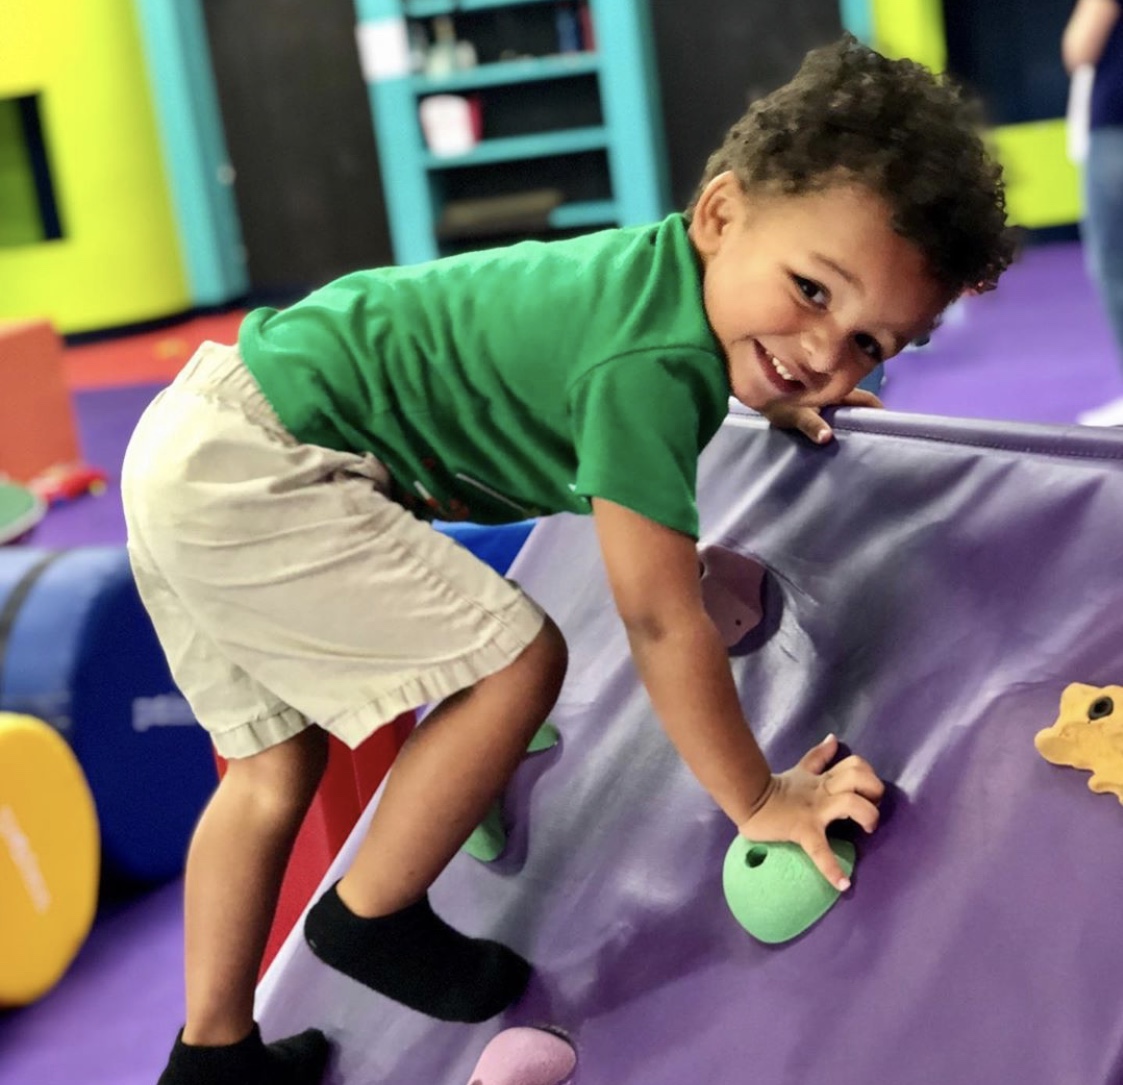 This sweet young boy loves our fitness classes at Romp n' Roll St. Petersburg.